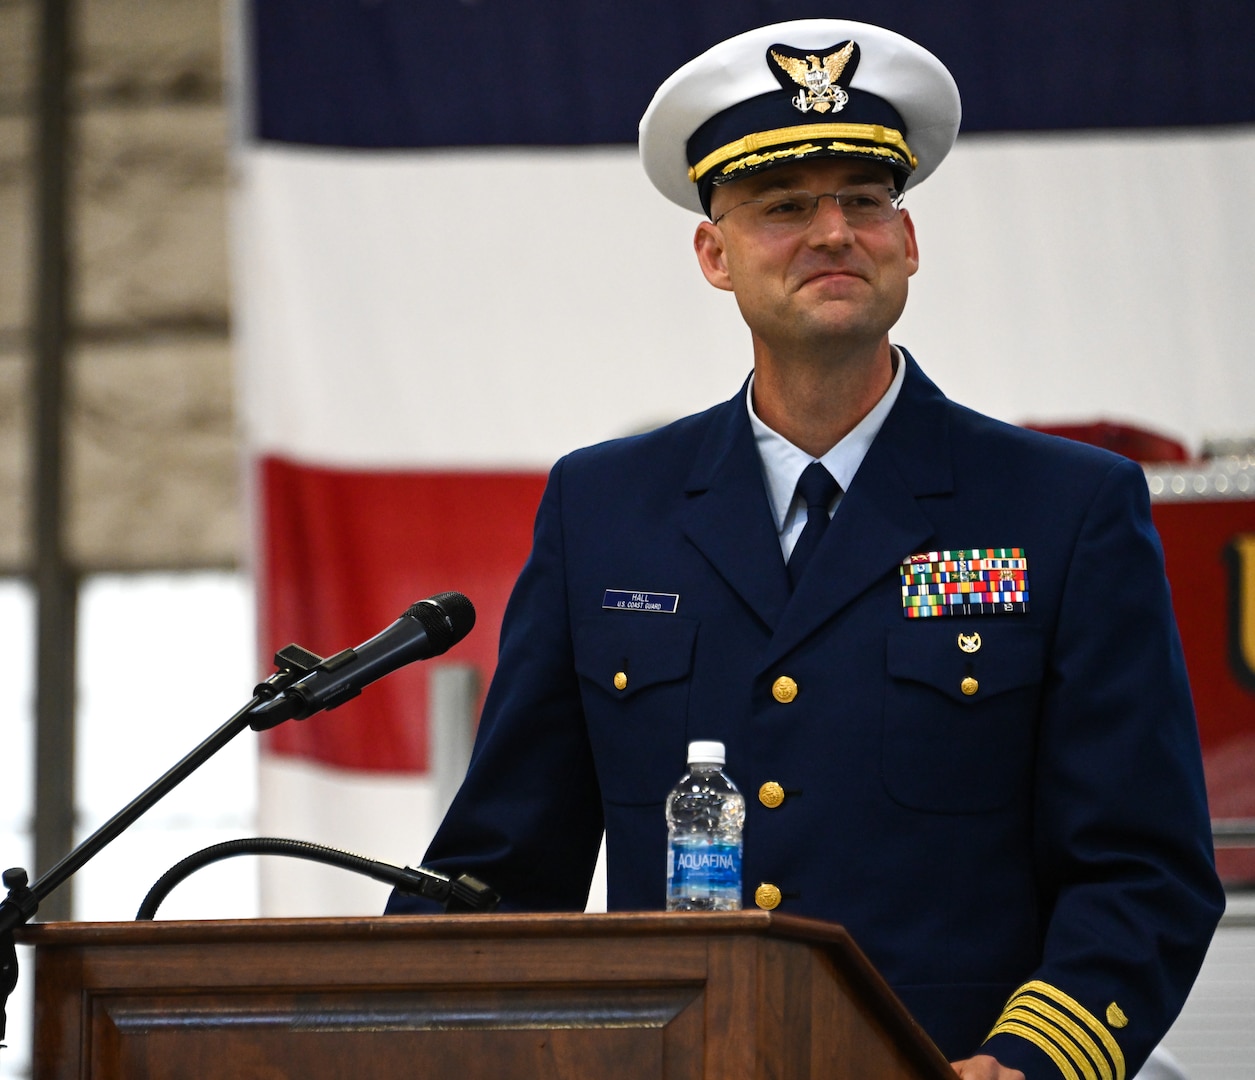 U.S. Coast Guard Capt. Jeremey Hall addresses Base Kodiak crew members as the oncoming commanding officer during a change-of-command ceremony at Air Station Kodiak, June 6, 2023. The change-of-command ceremony is a historic Coast Guard and Naval tradition, which has remained unchanged for centuries and includes the reading of the command orders in the presence of all unit crewmembers. U.S. Coast Guard photo by Petty Officer 3rd Class Ian Gray.